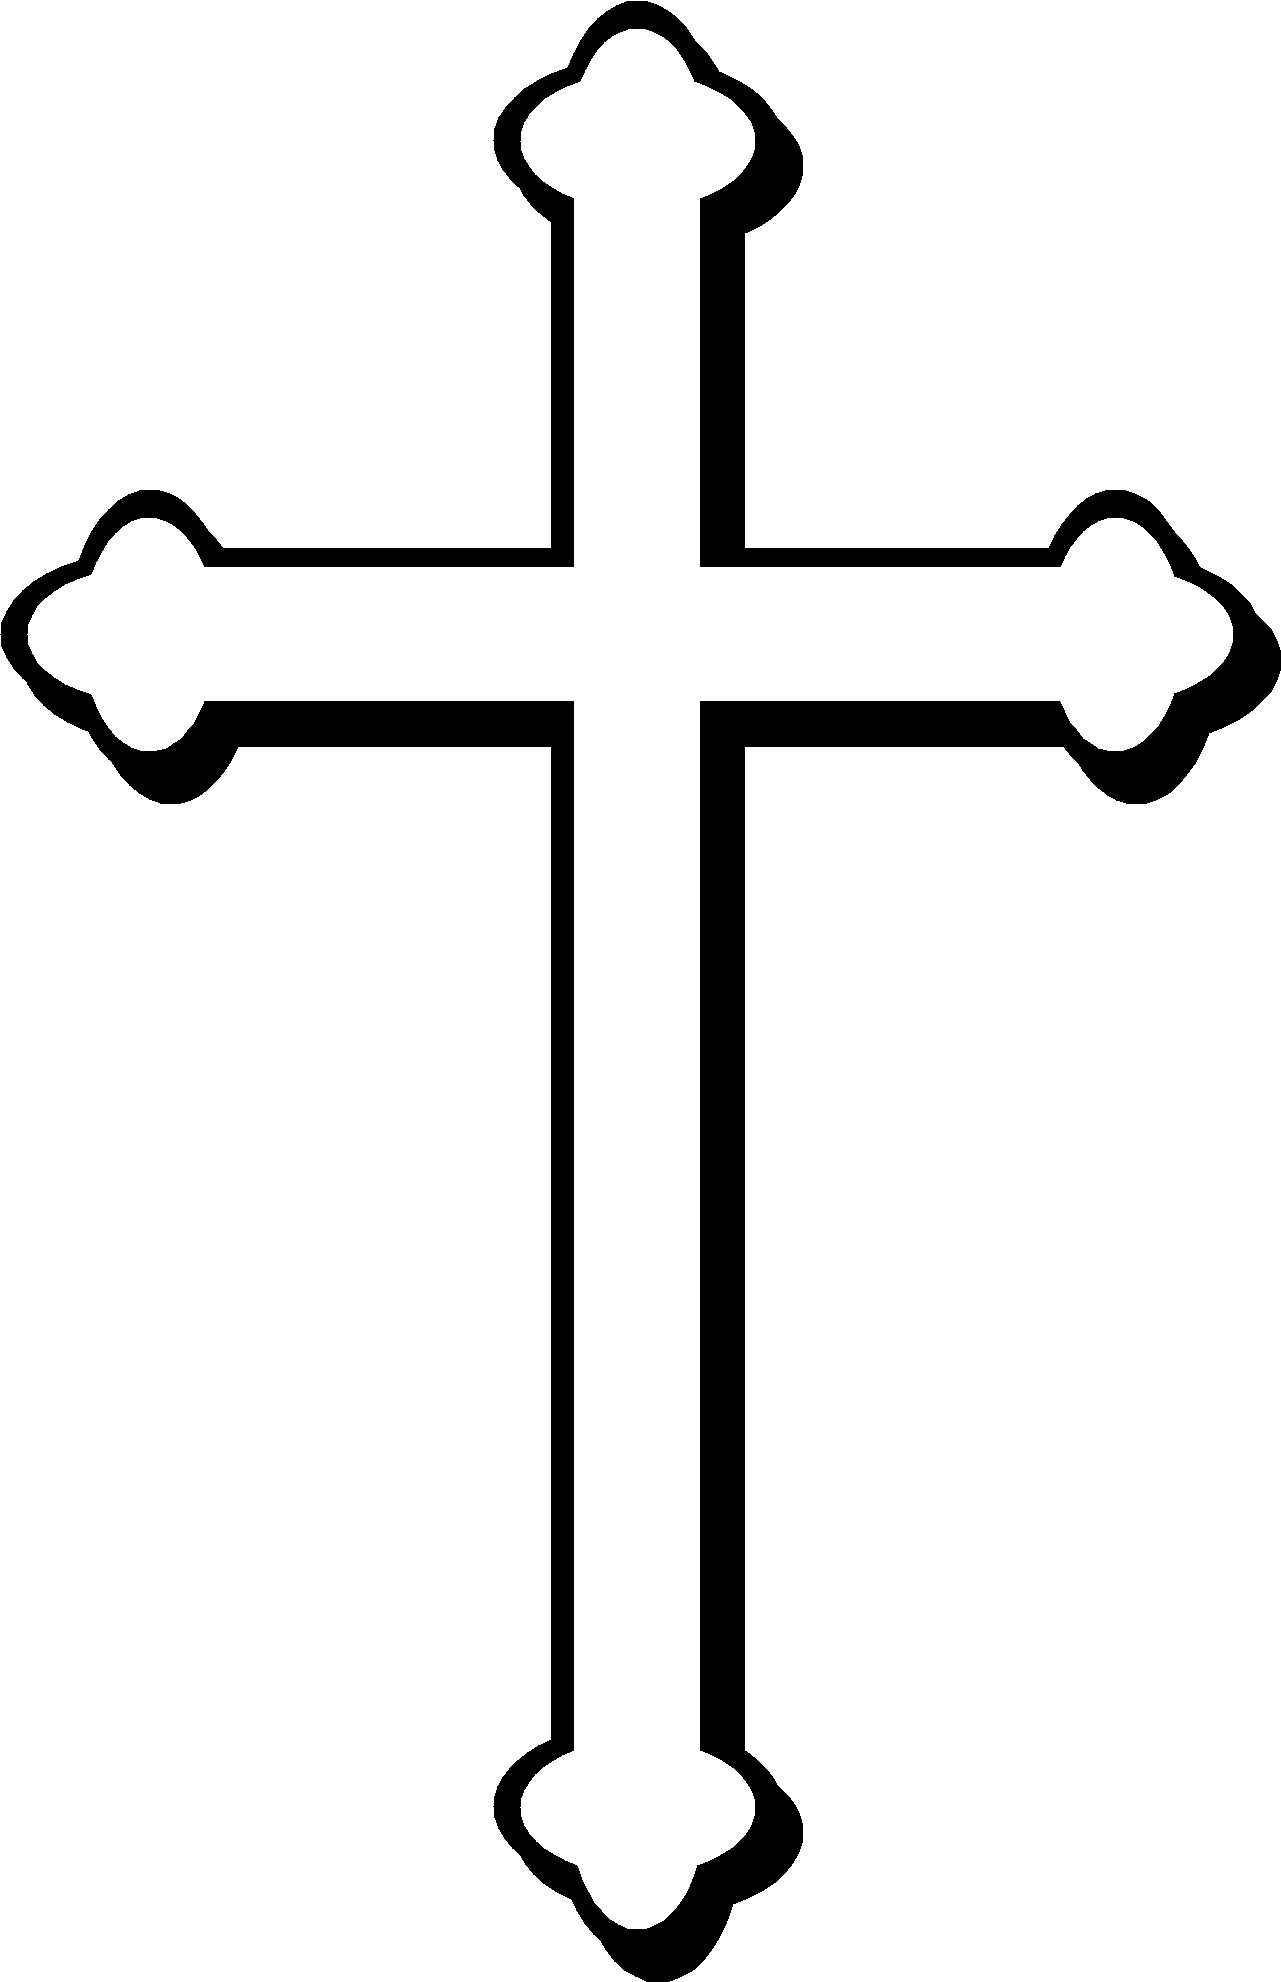 Sign placed on jesus cross clipart